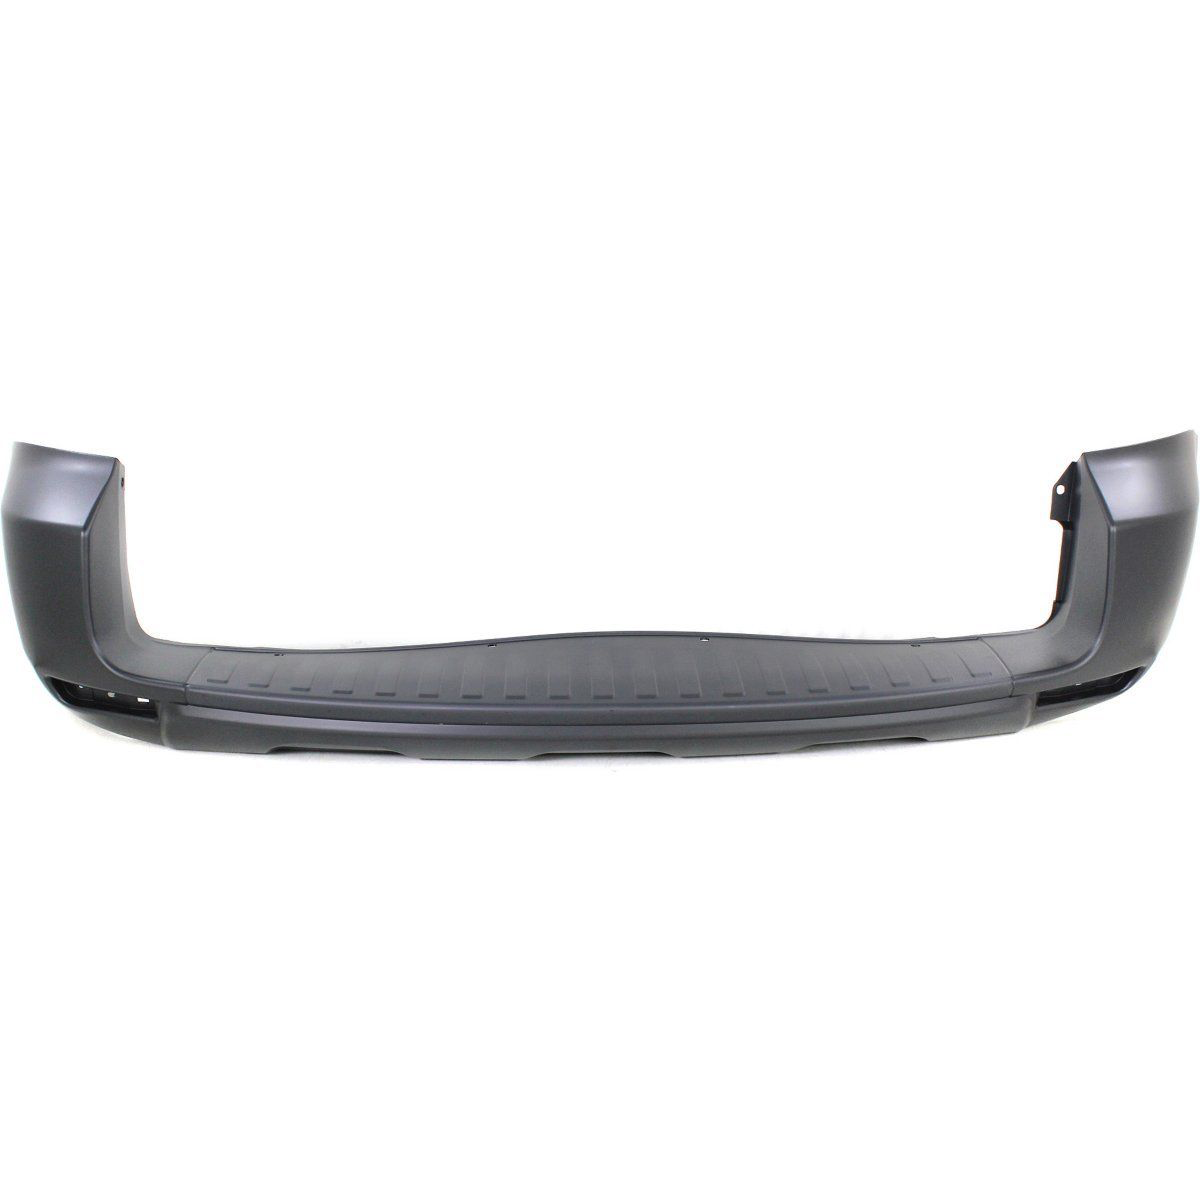 2009-2012 TOYOTA RAV4 Rear Bumper Cover w/o Wheel Opening Flares  w/Gate Mtd Spare Painted to Match